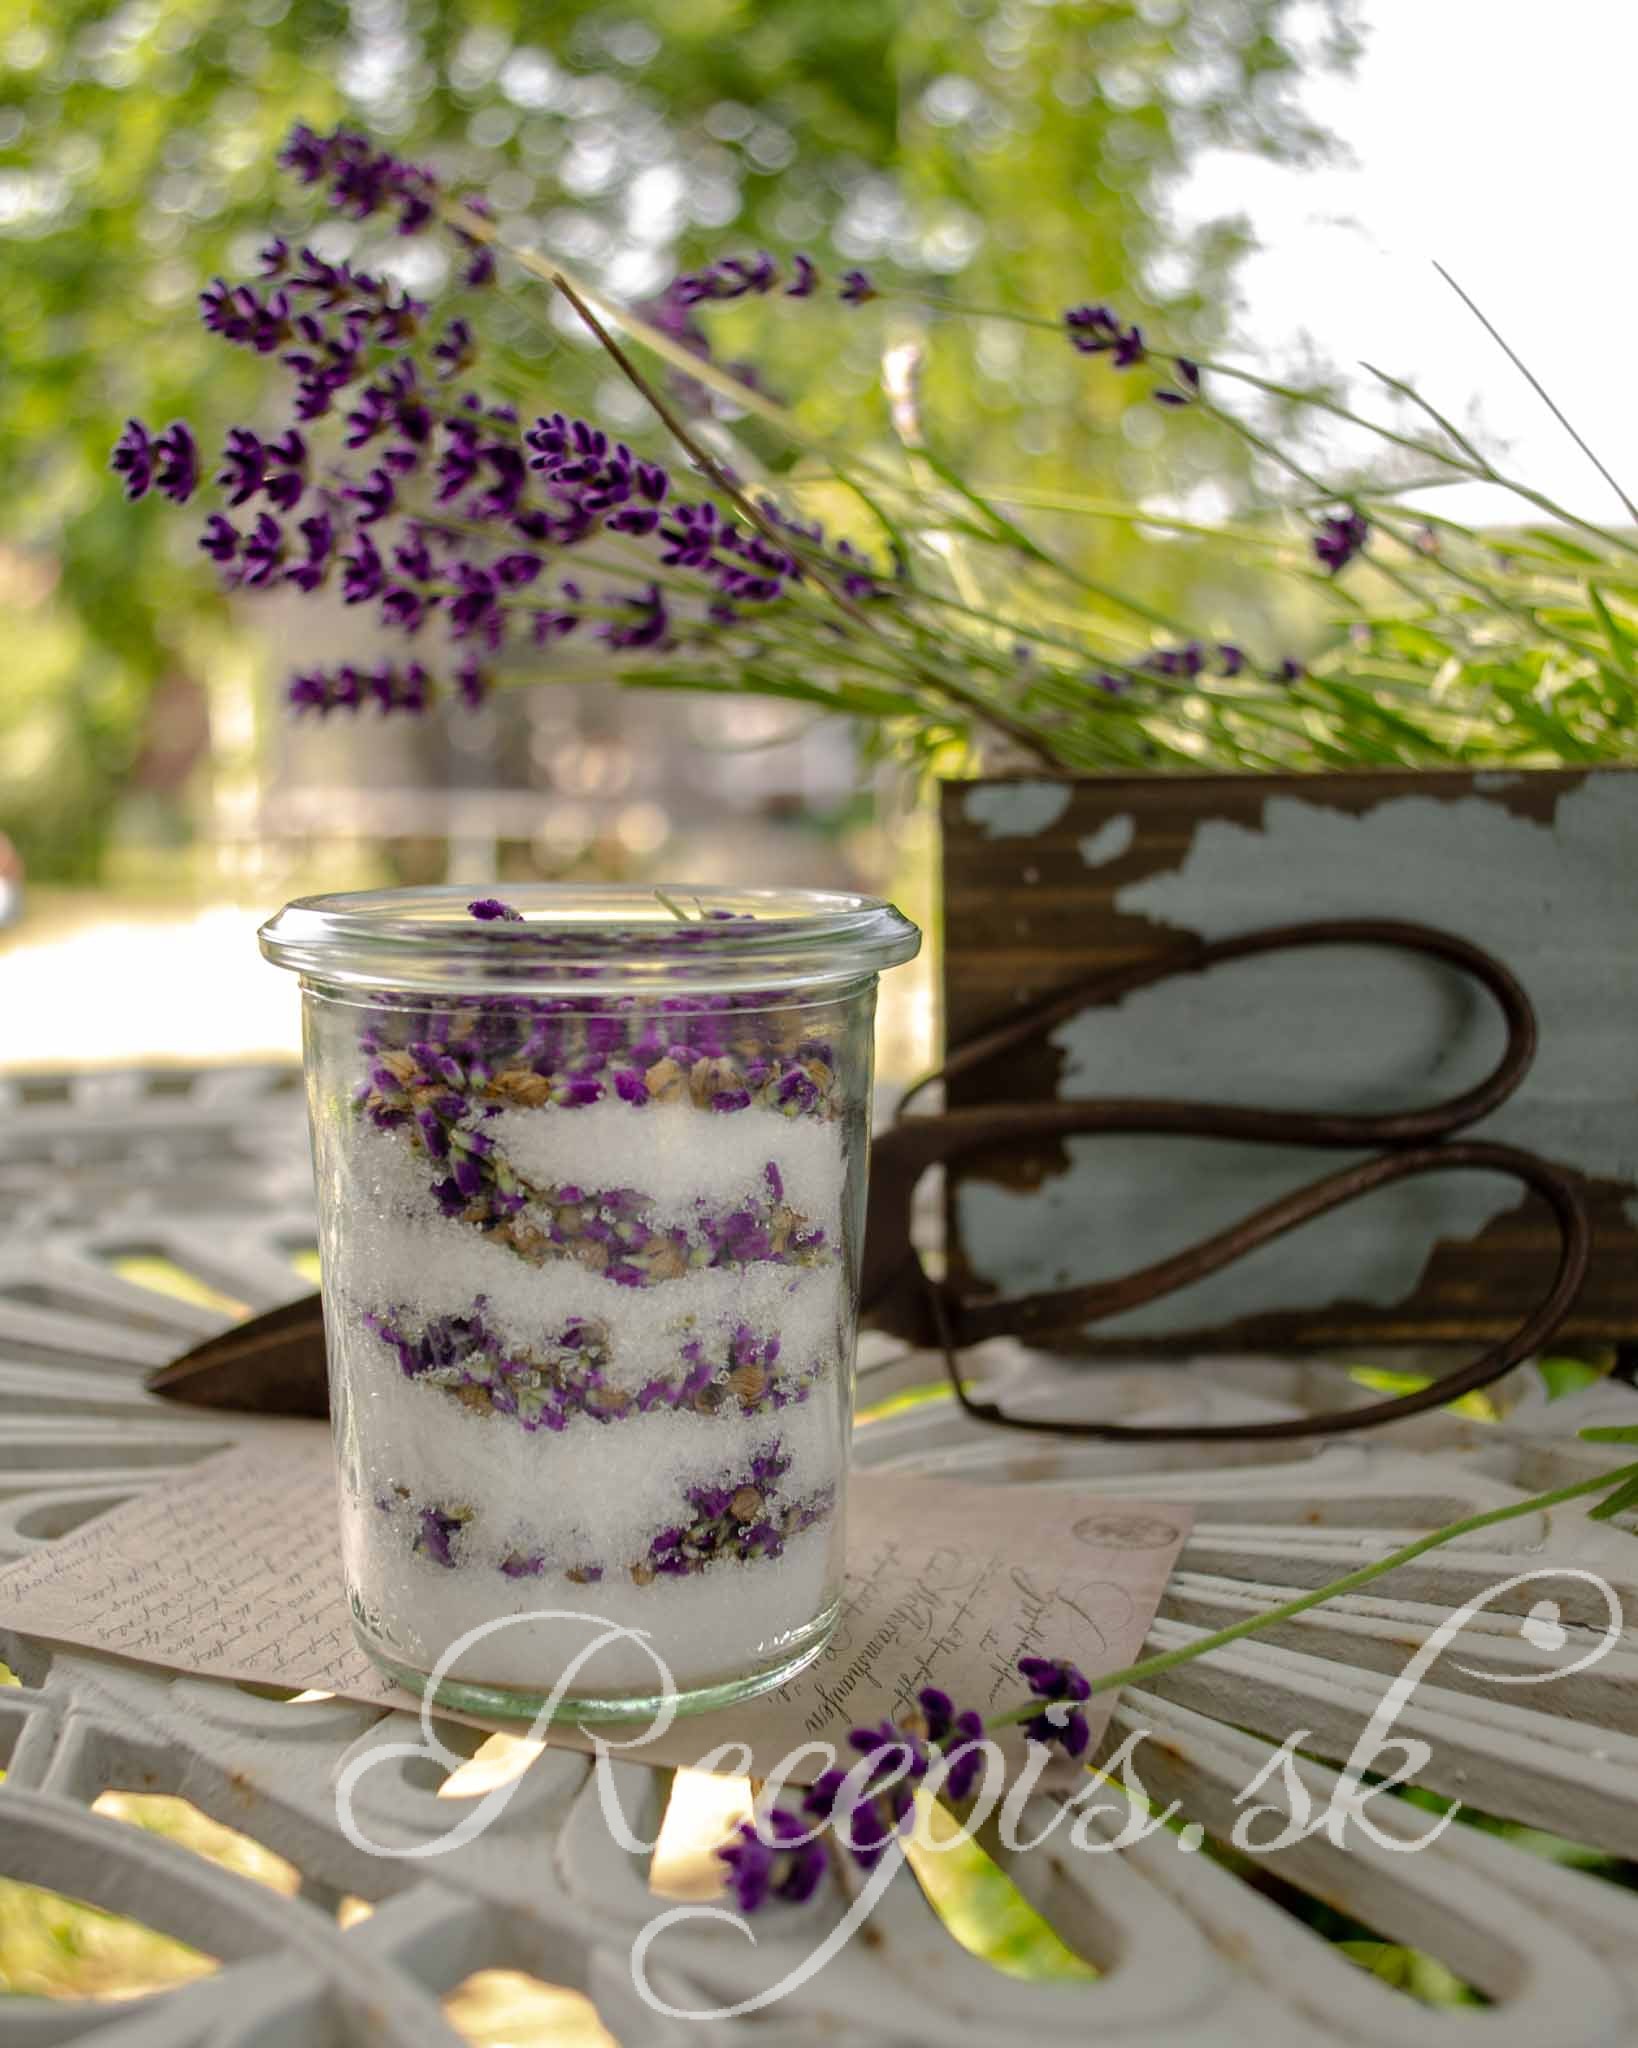 Healing lavender syrup without cooking